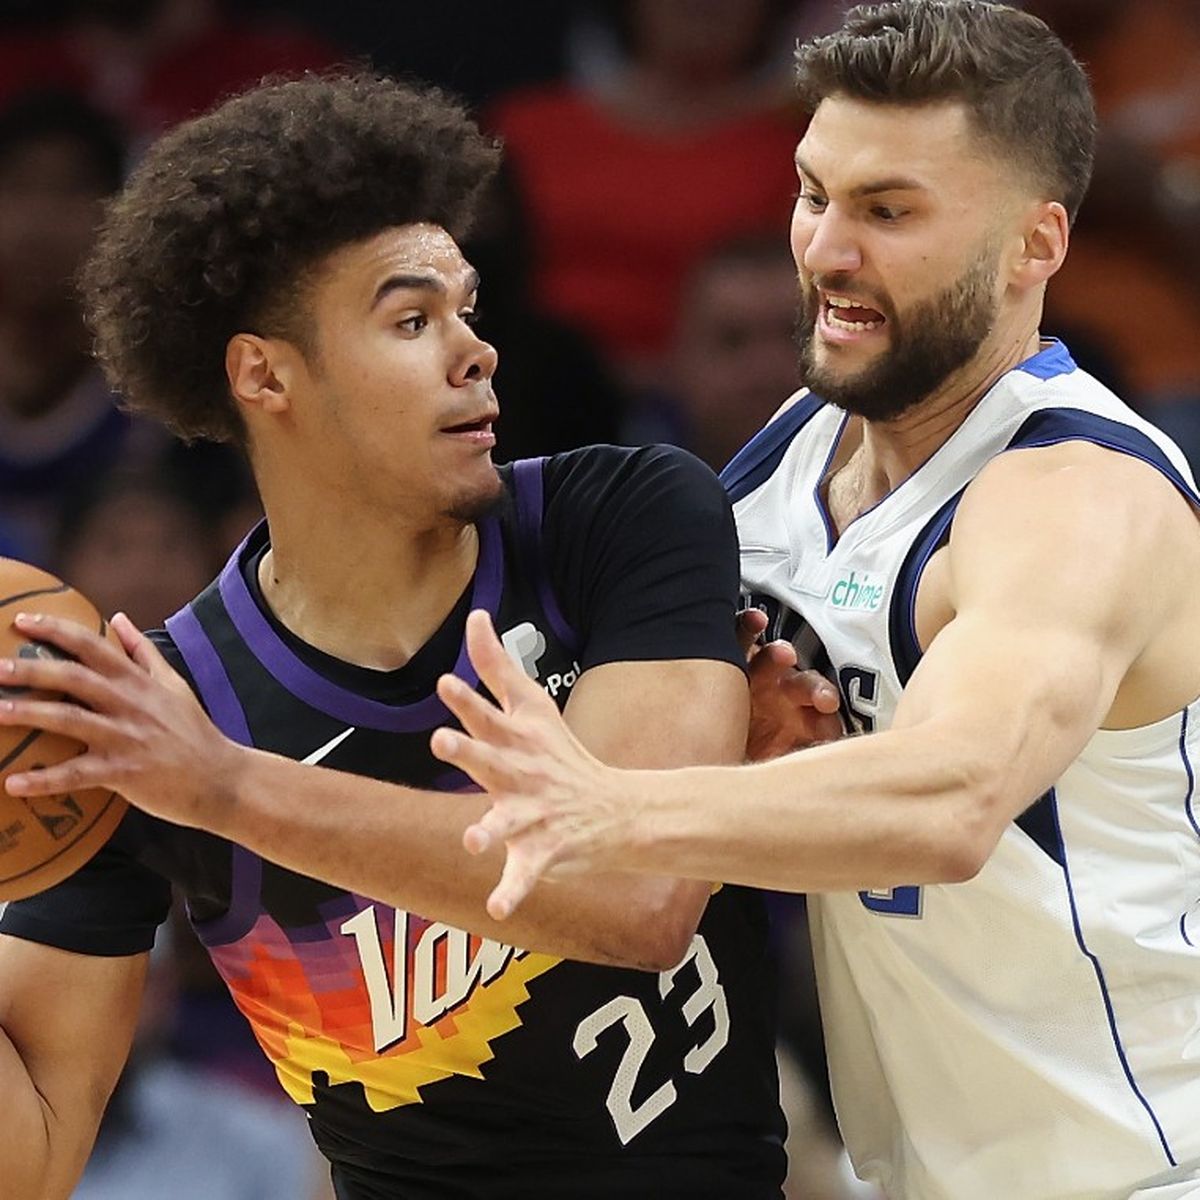 Maxi Kleber's Turns Out OK After Scary Fall vs. Suns 